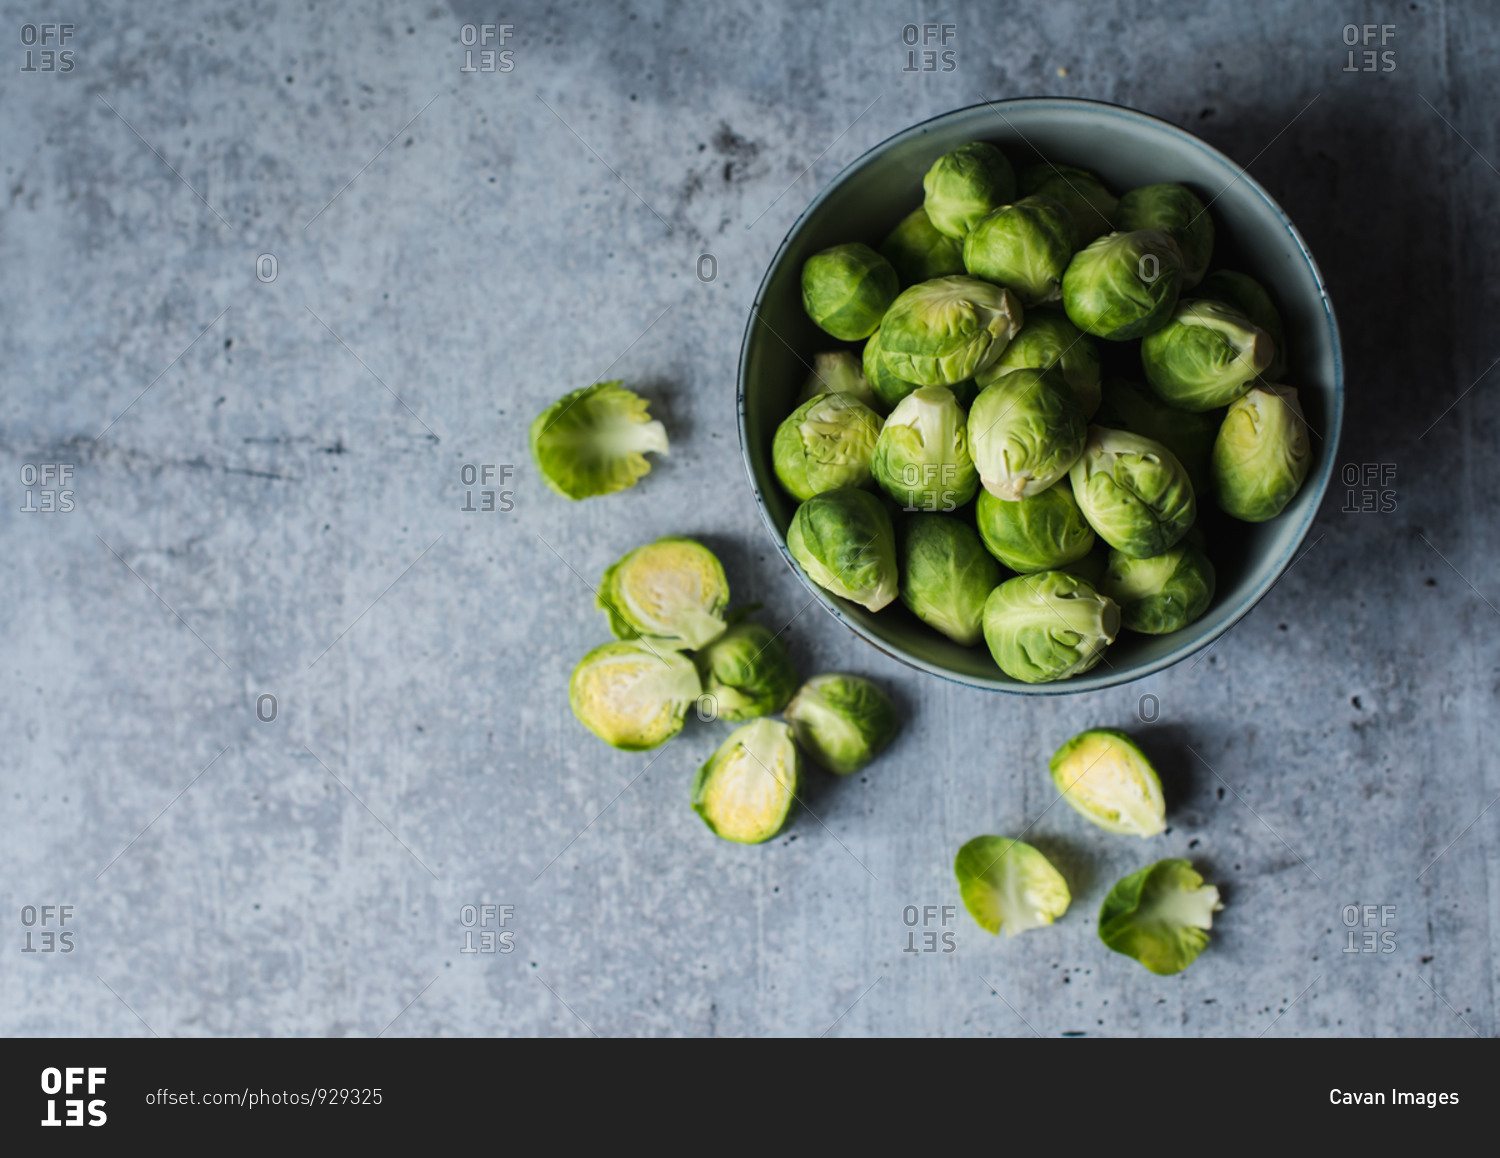 Overhead view of bowl of Brussels sprouts on cement counter.